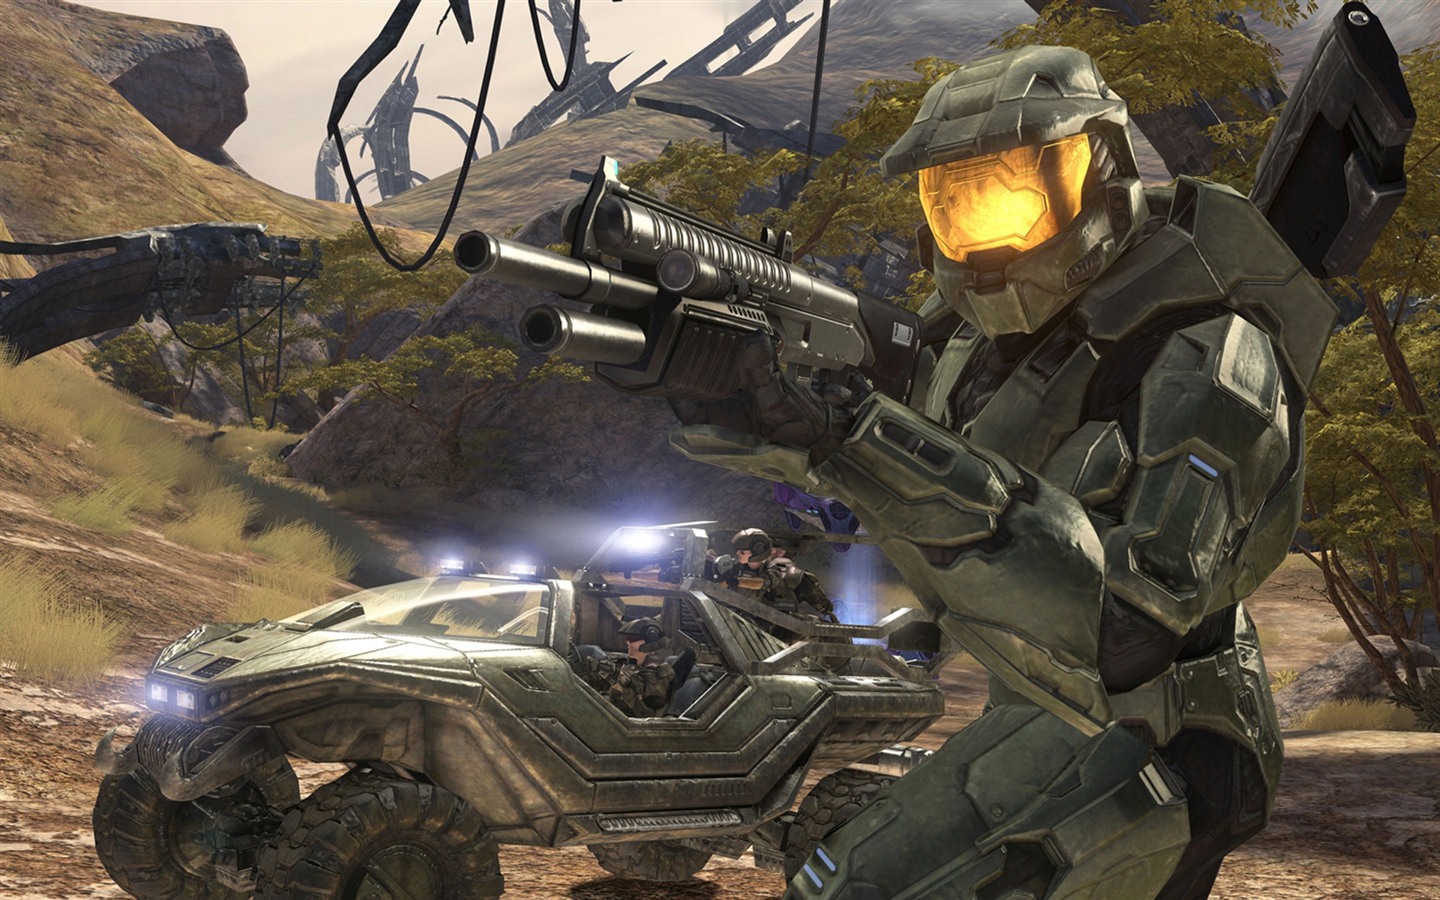 Halo game HD wallpapers #13 - 1440x900